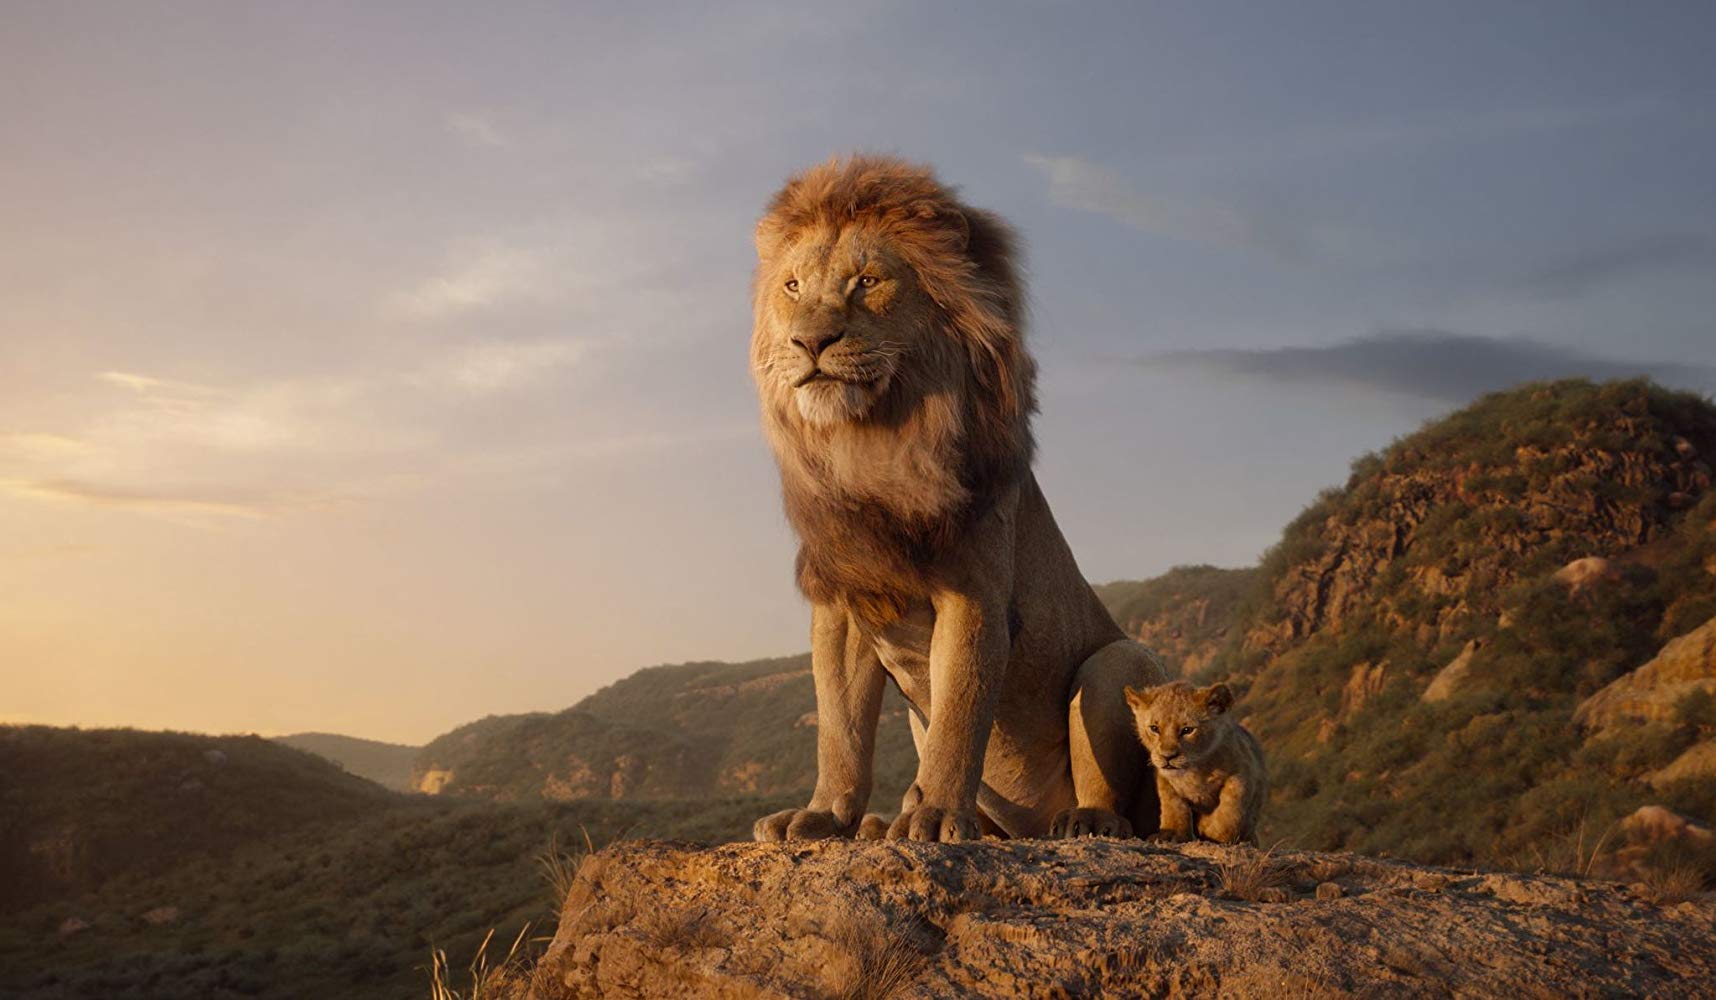 REVIEW: ‘The Lion King’ is a superb family-friendly remake - WordSlingers